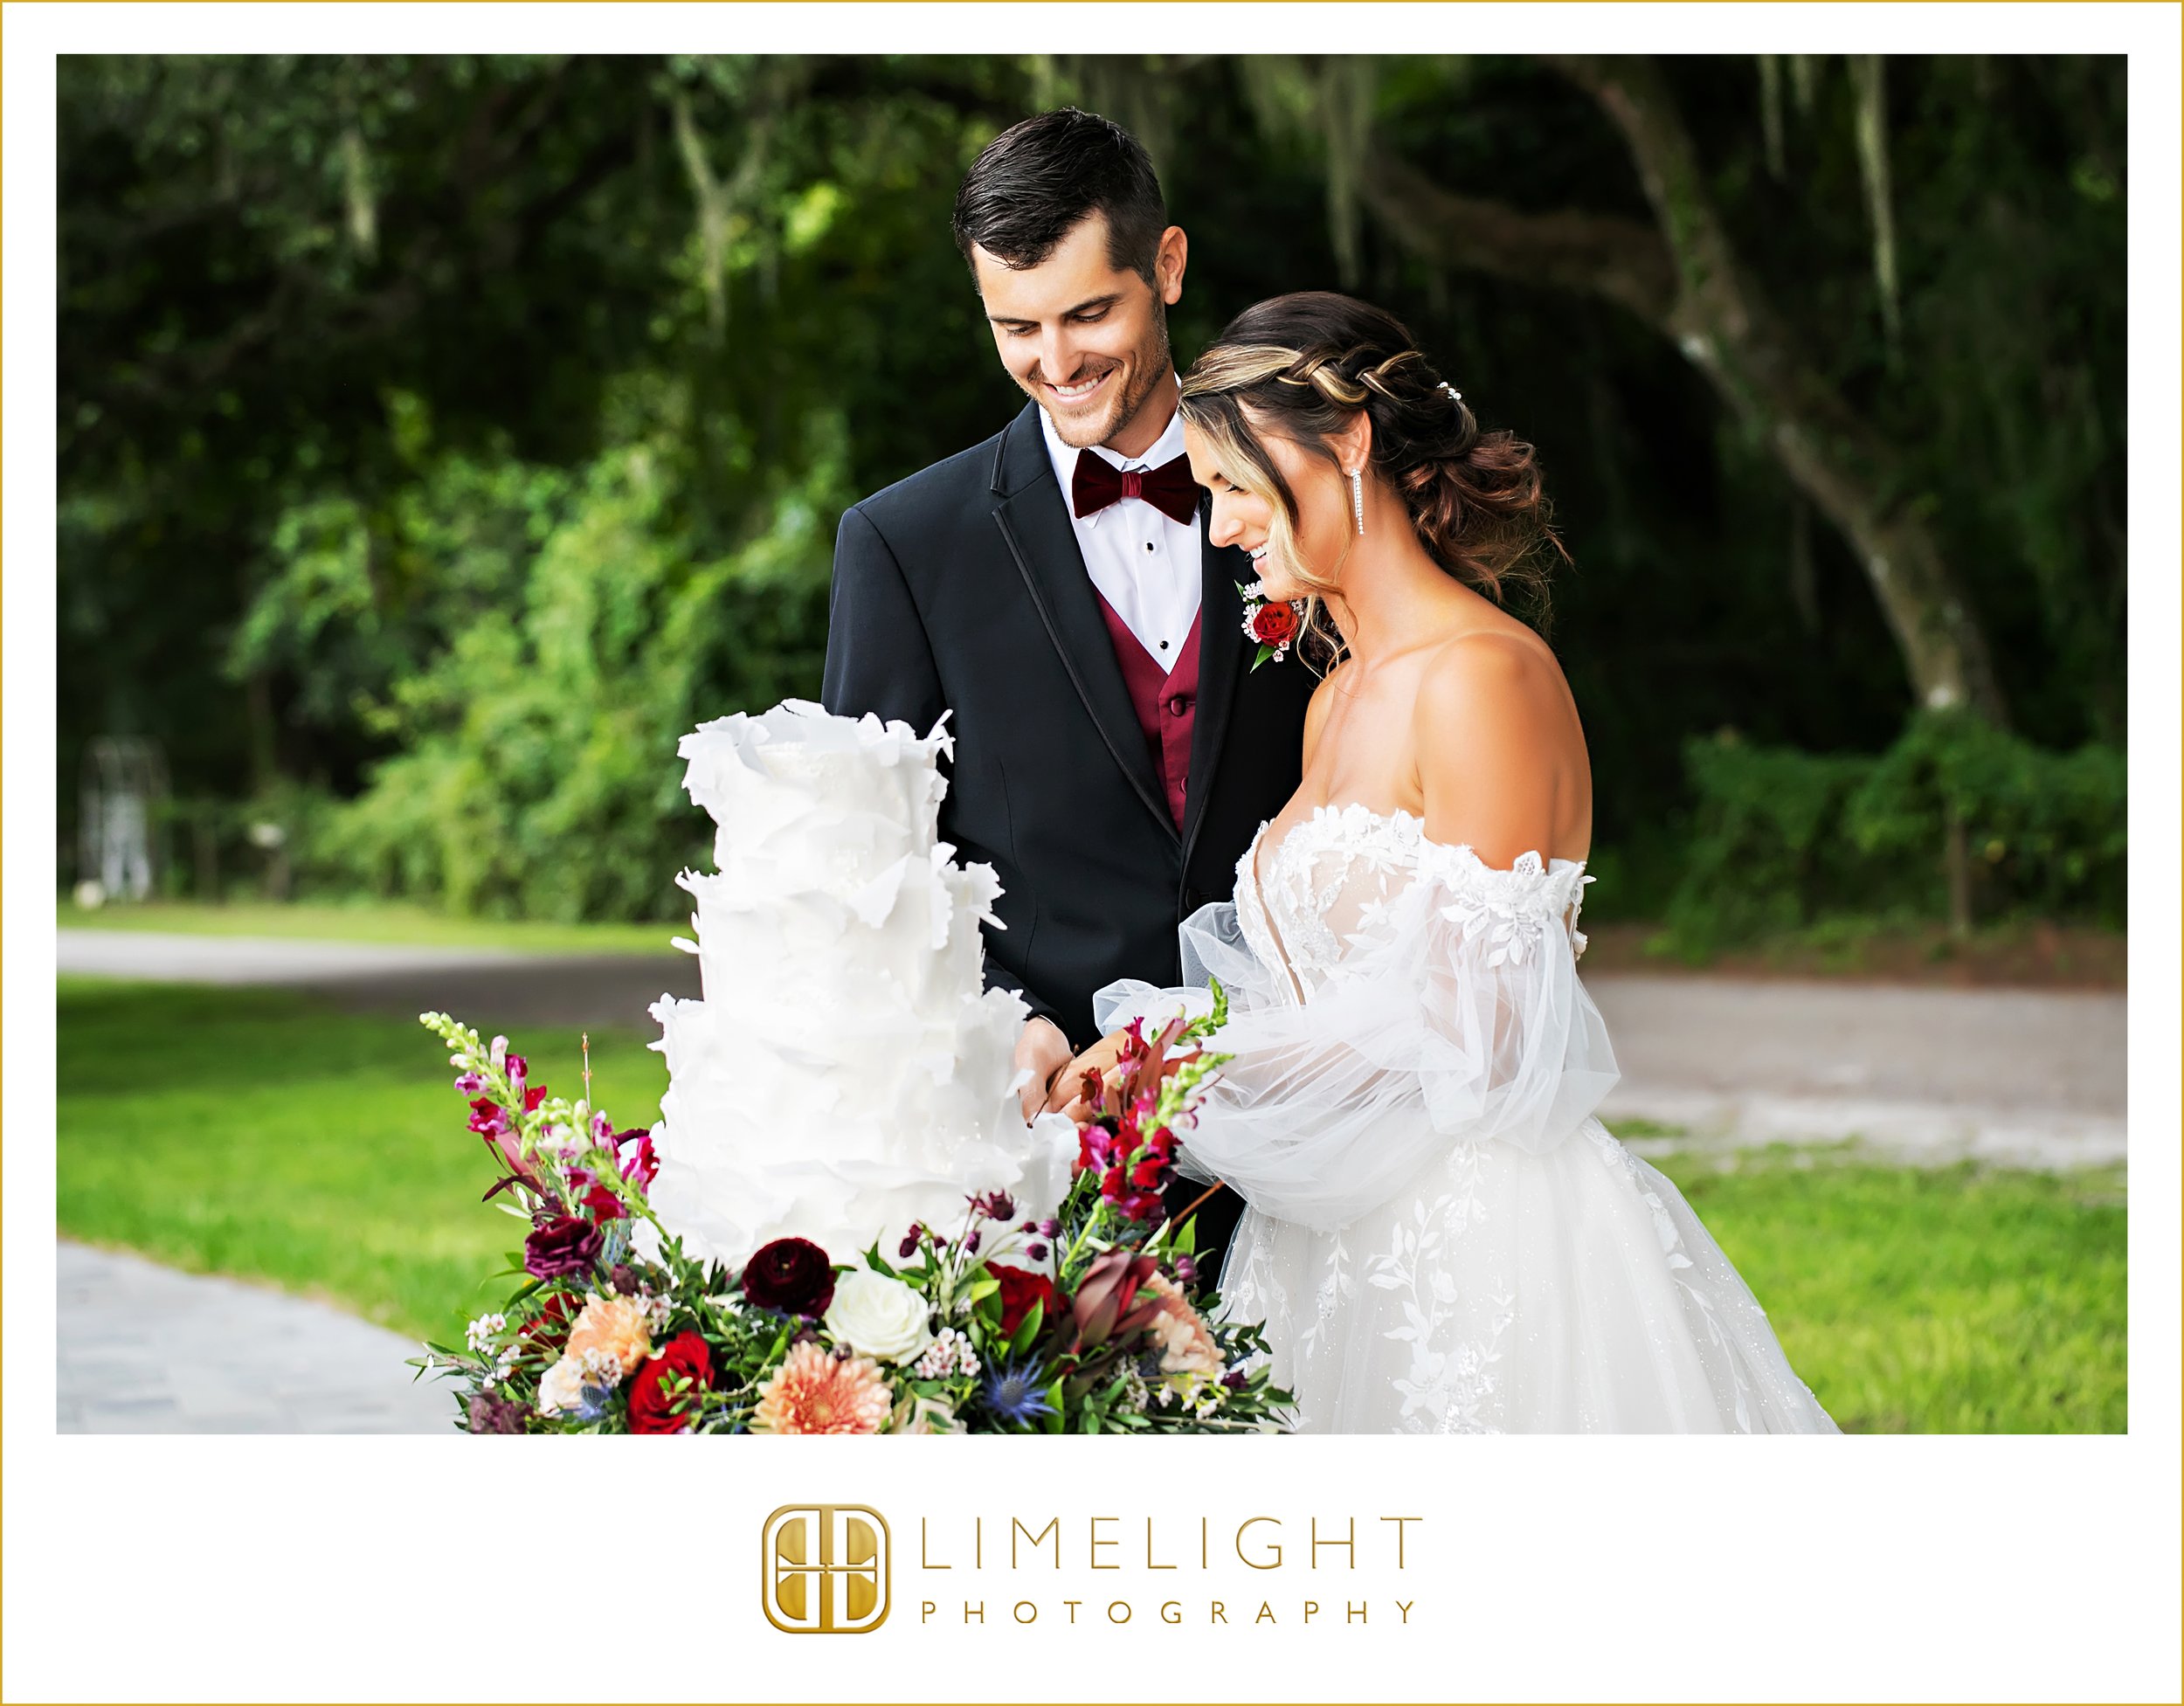 0030-wedding-photography-packages-legacy-lanes-brooksville-fl.jpg